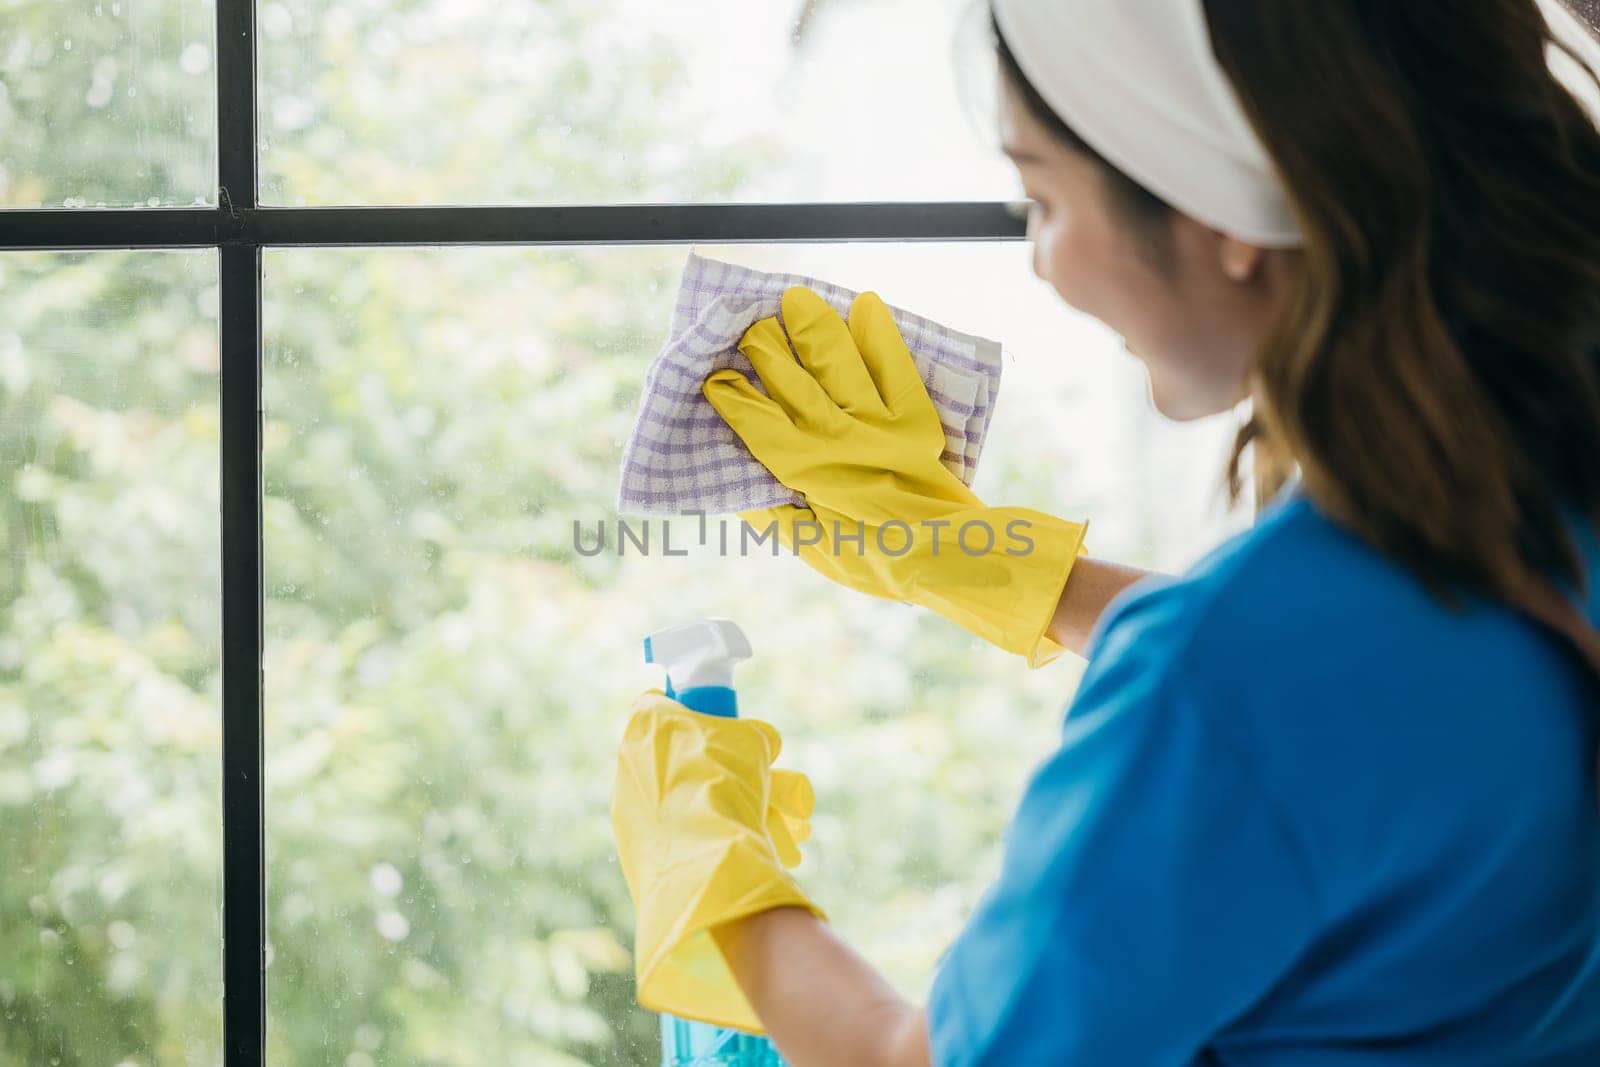 A young woman wearing gloves joyfully sprays and wipes office windows. Her cleaning routine emphasizes purity care and hygiene ensuring transparent sparkling windows. by Sorapop